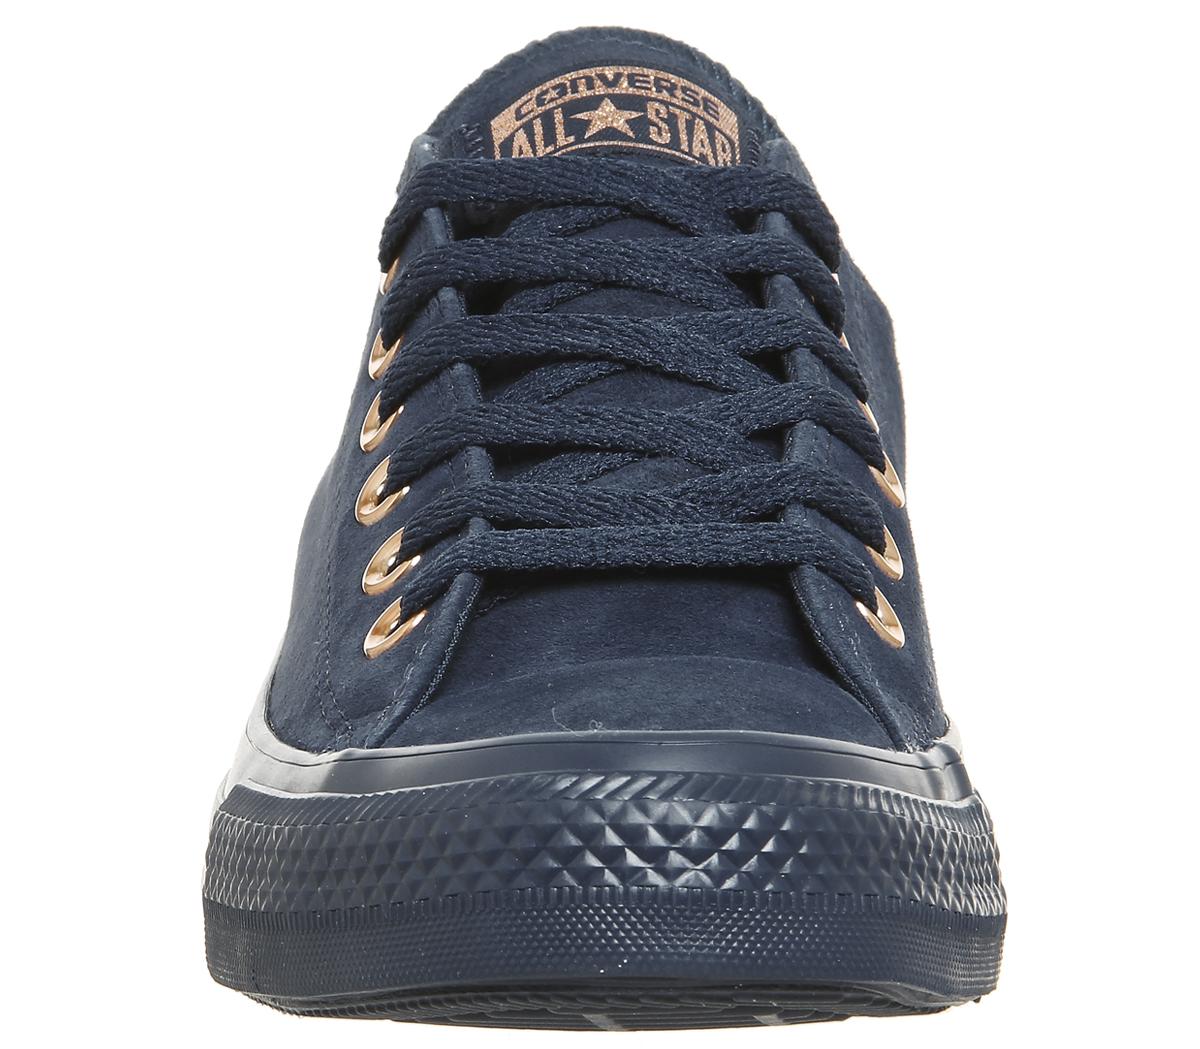 converse all star low leather navy cherry blossom